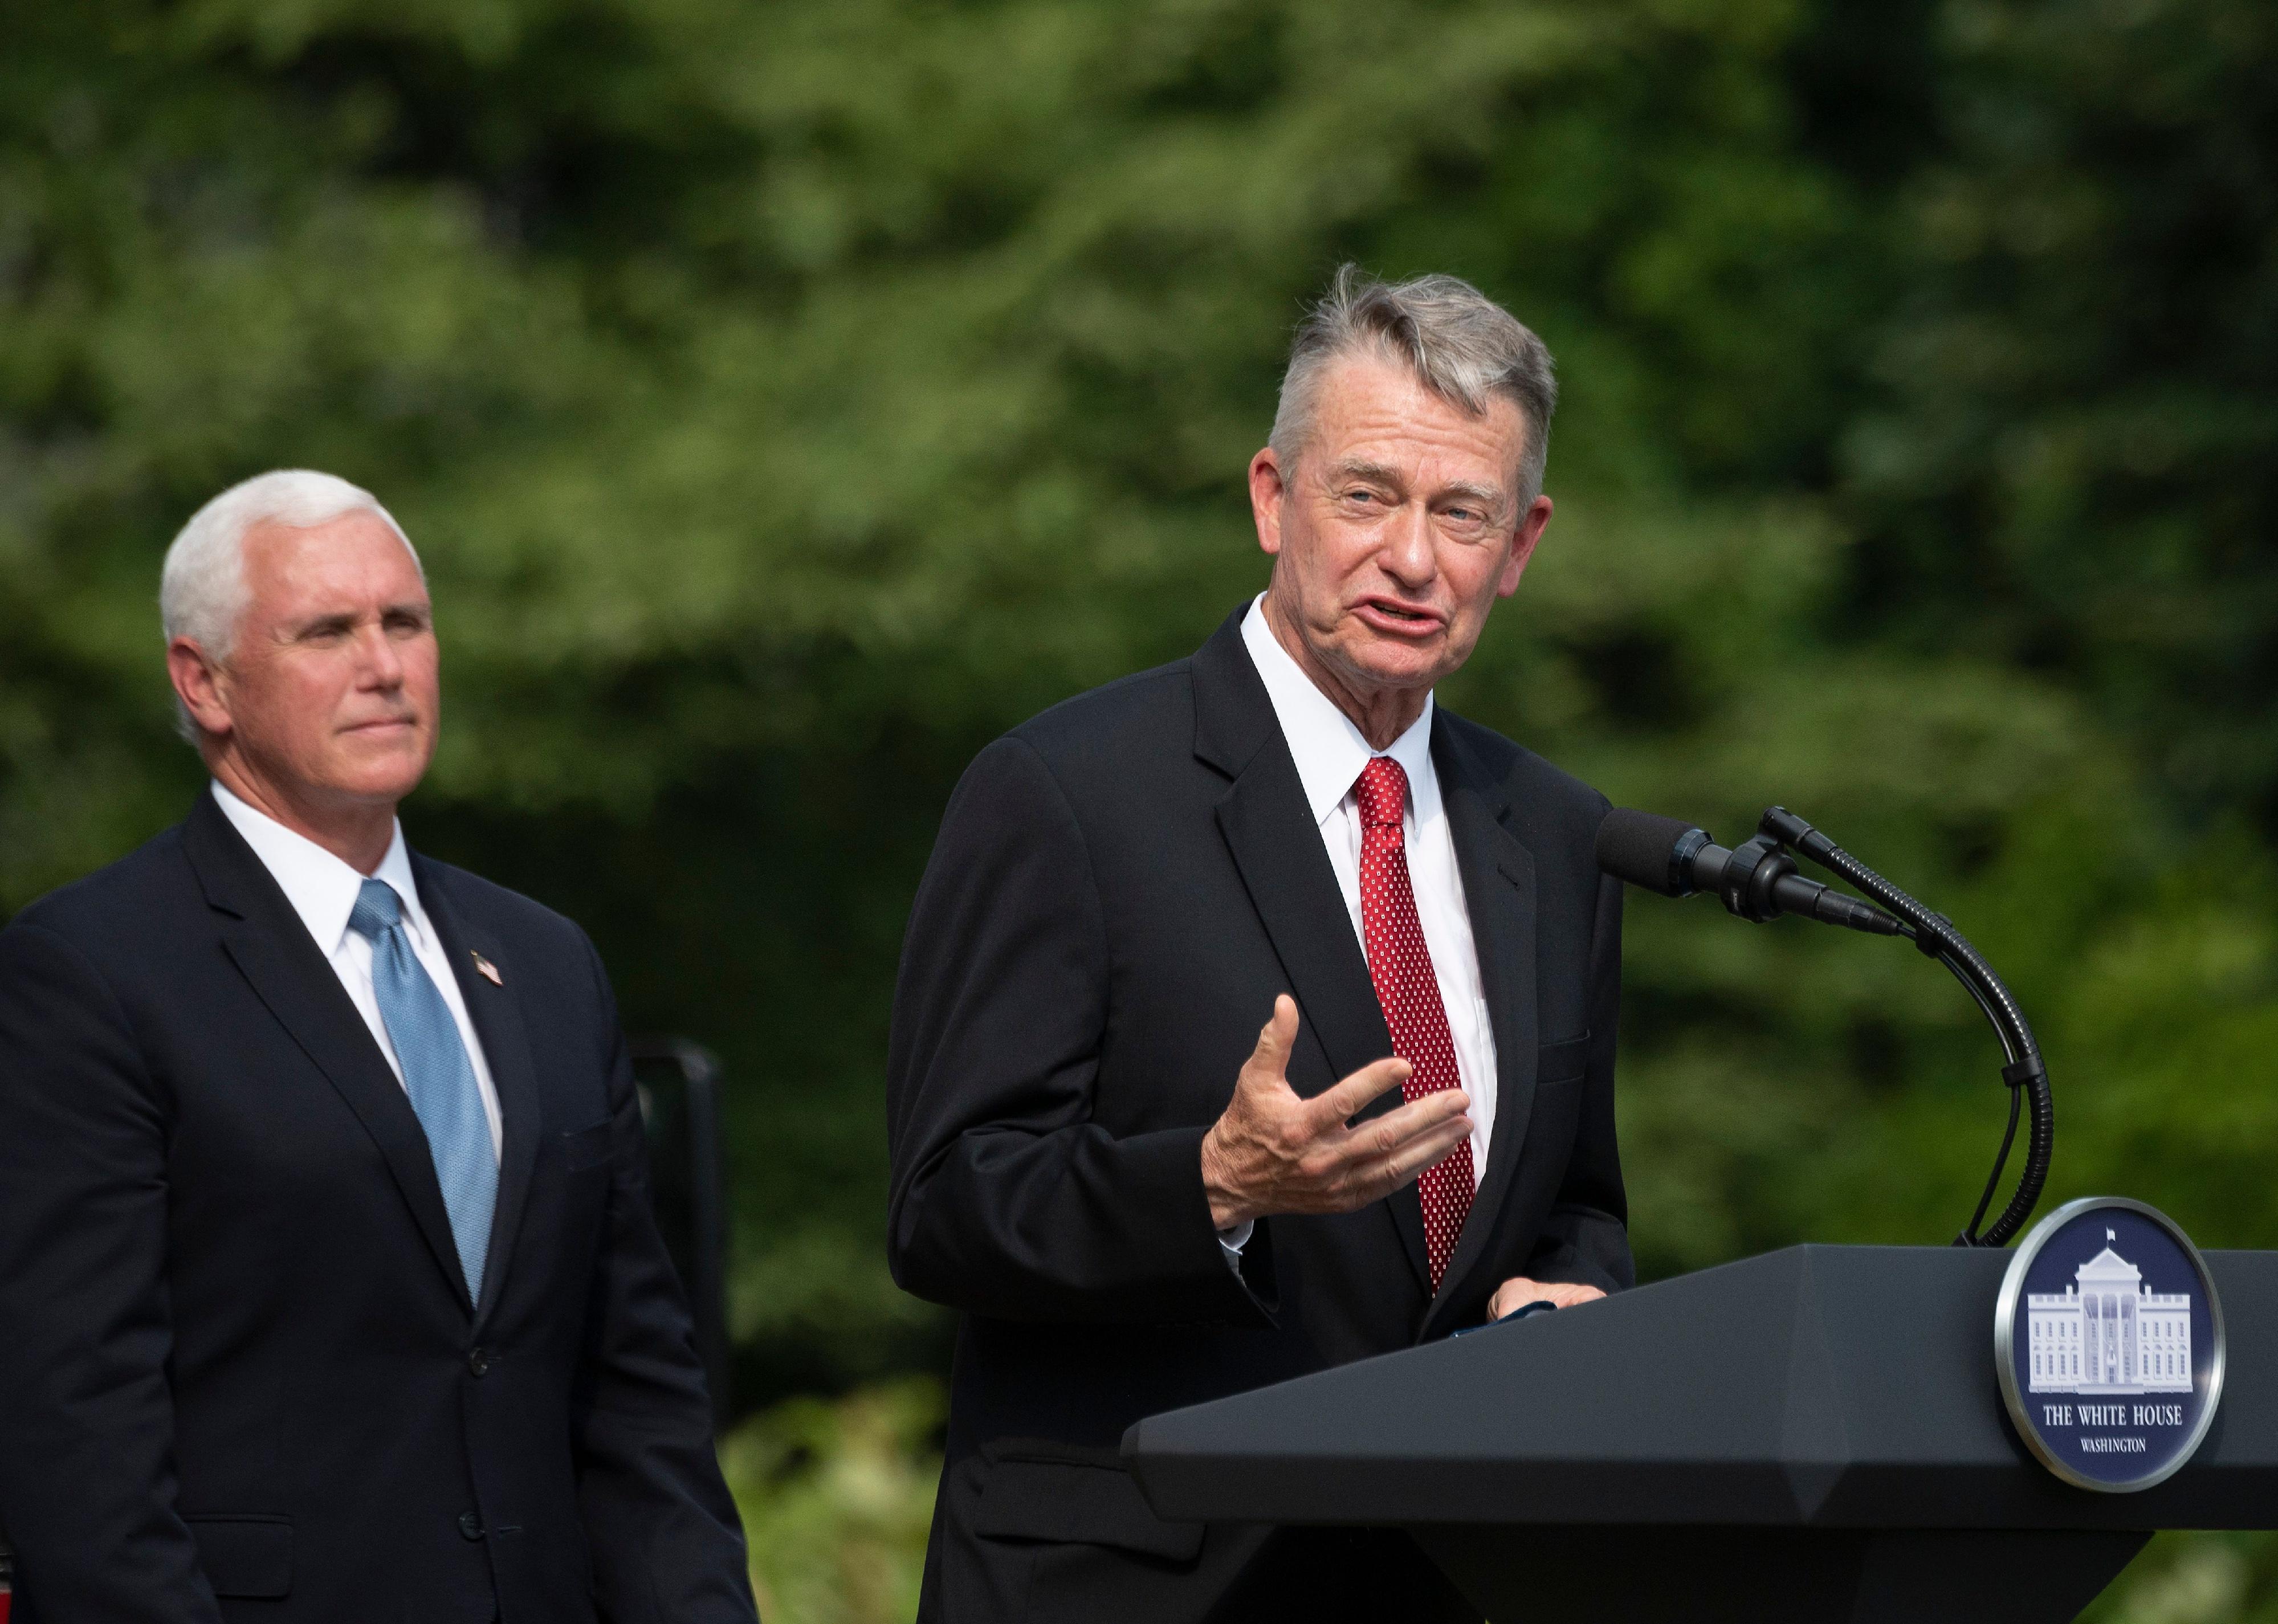  Governor Brad Little speaks at the White House